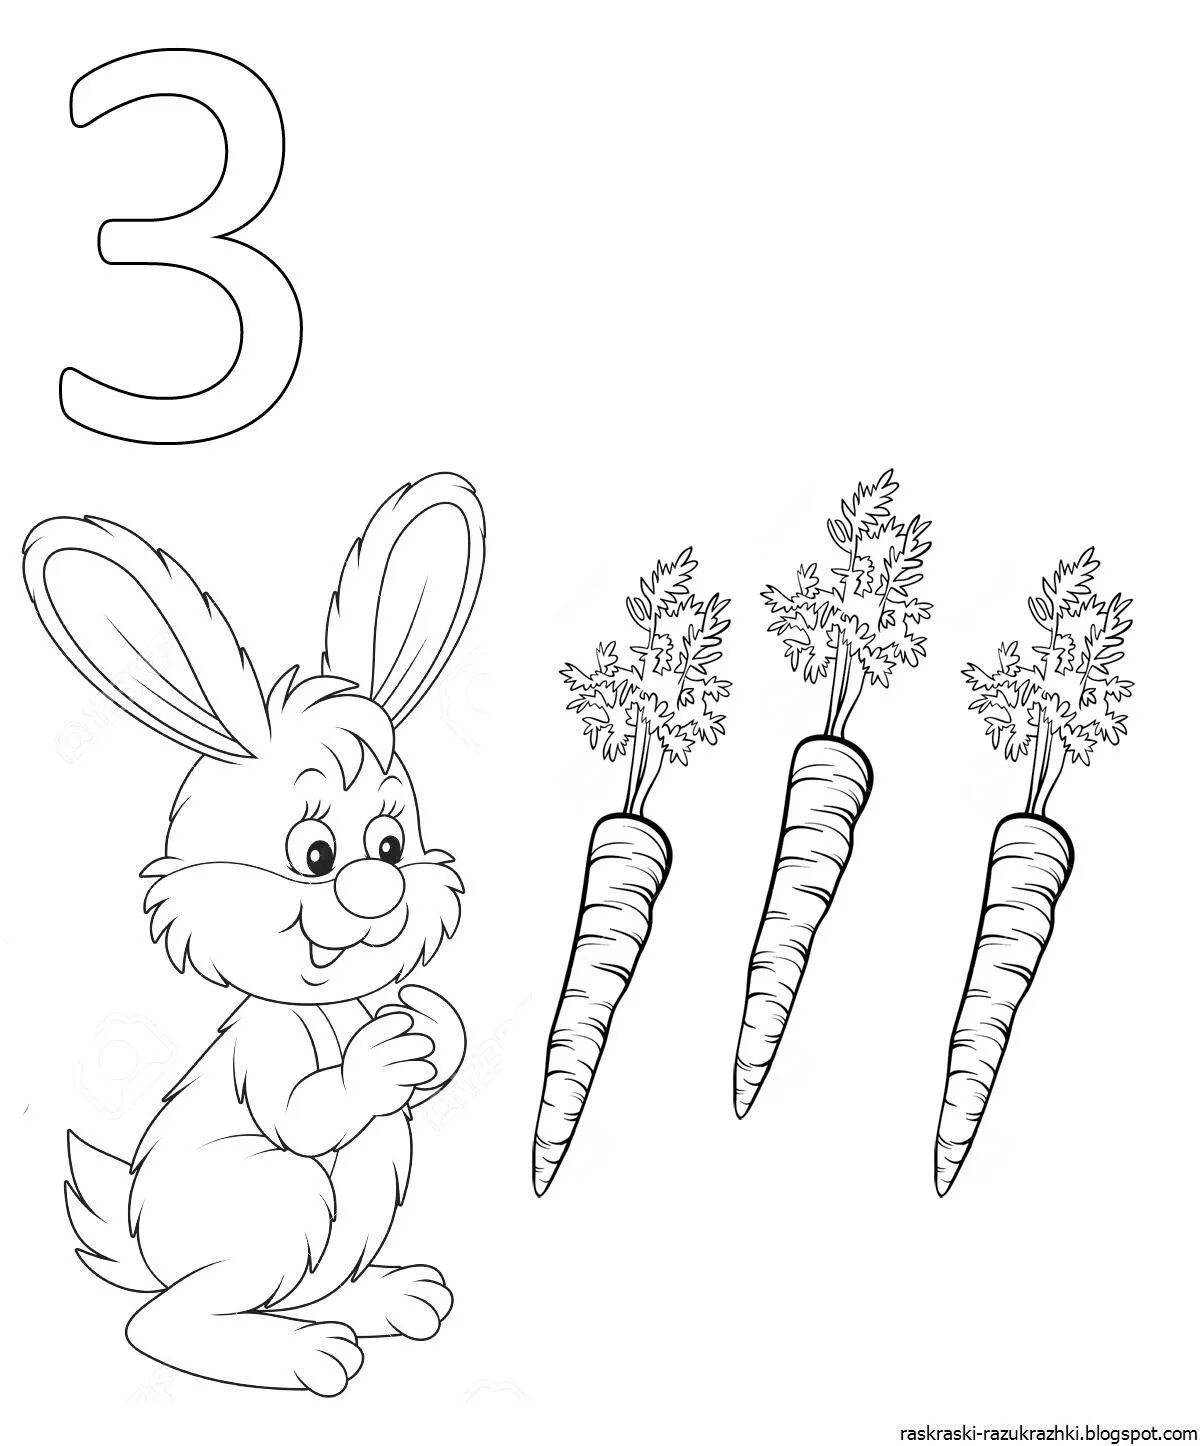 Animated receipt coloring page